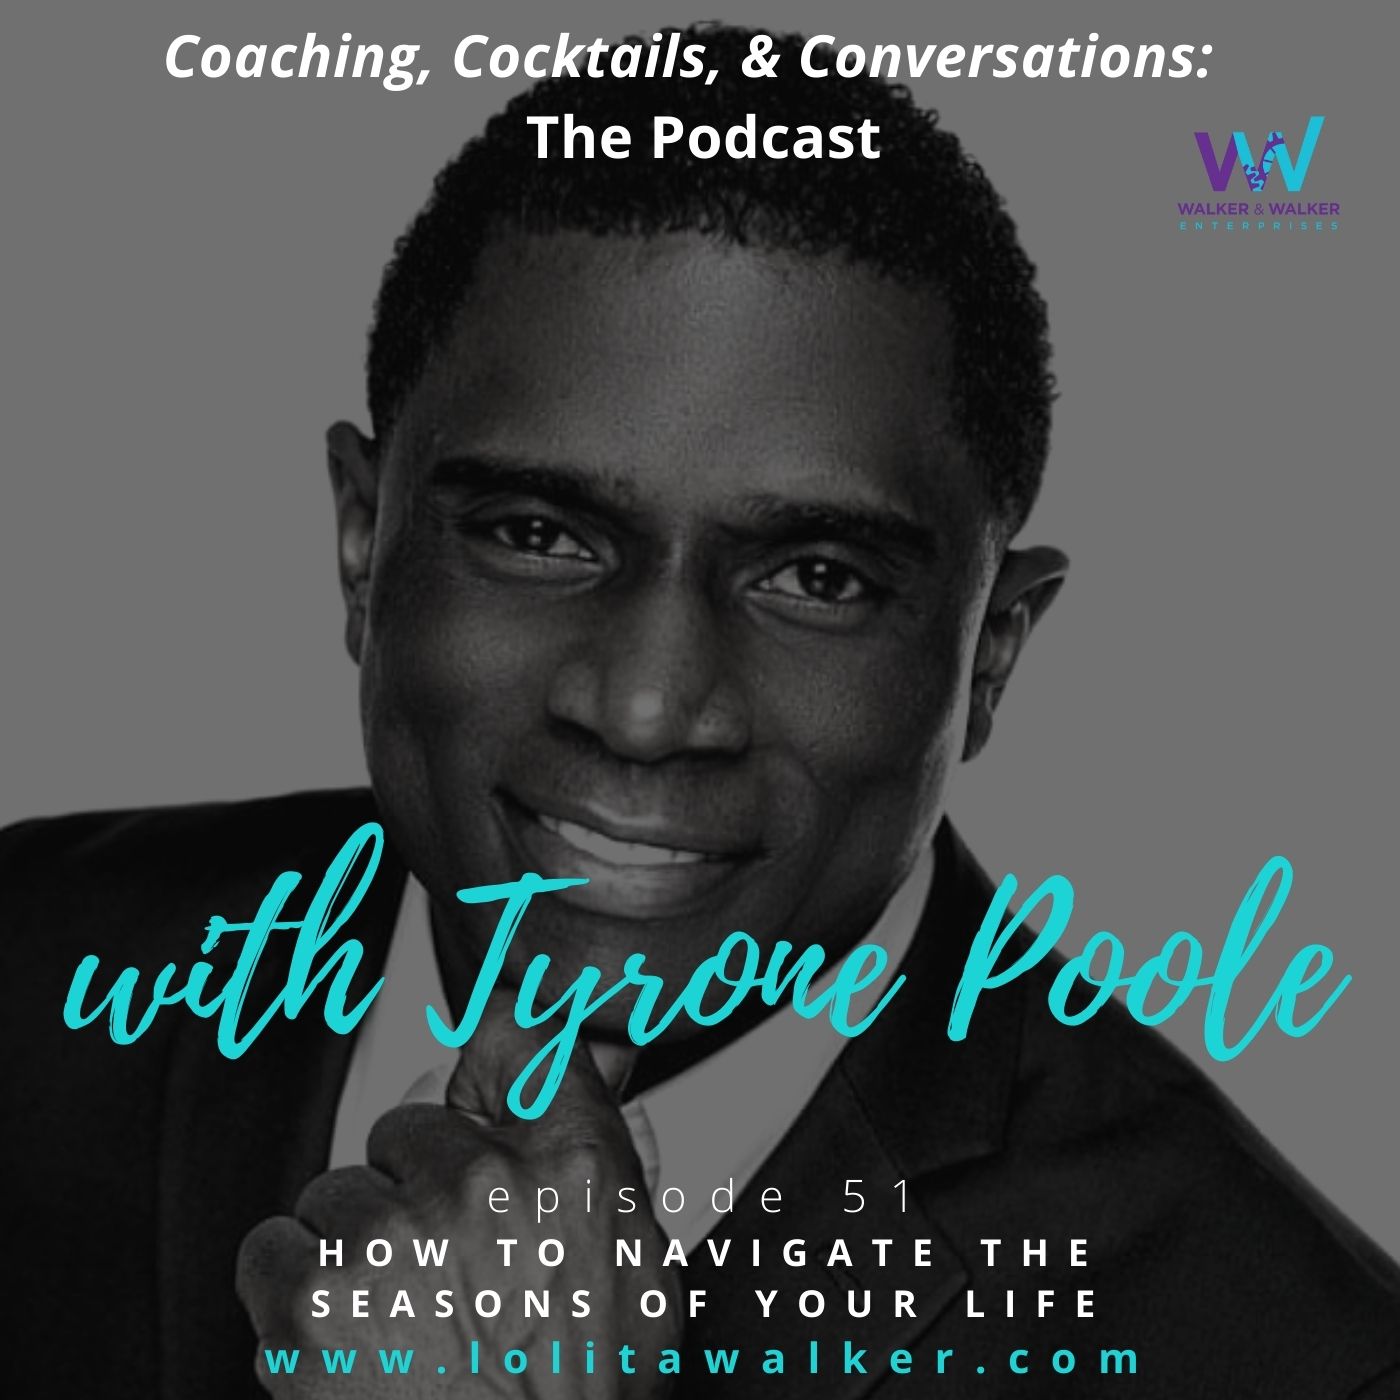 S3E51 - How to Navigate the Seasons of Your Life (with Tyrone Poole)